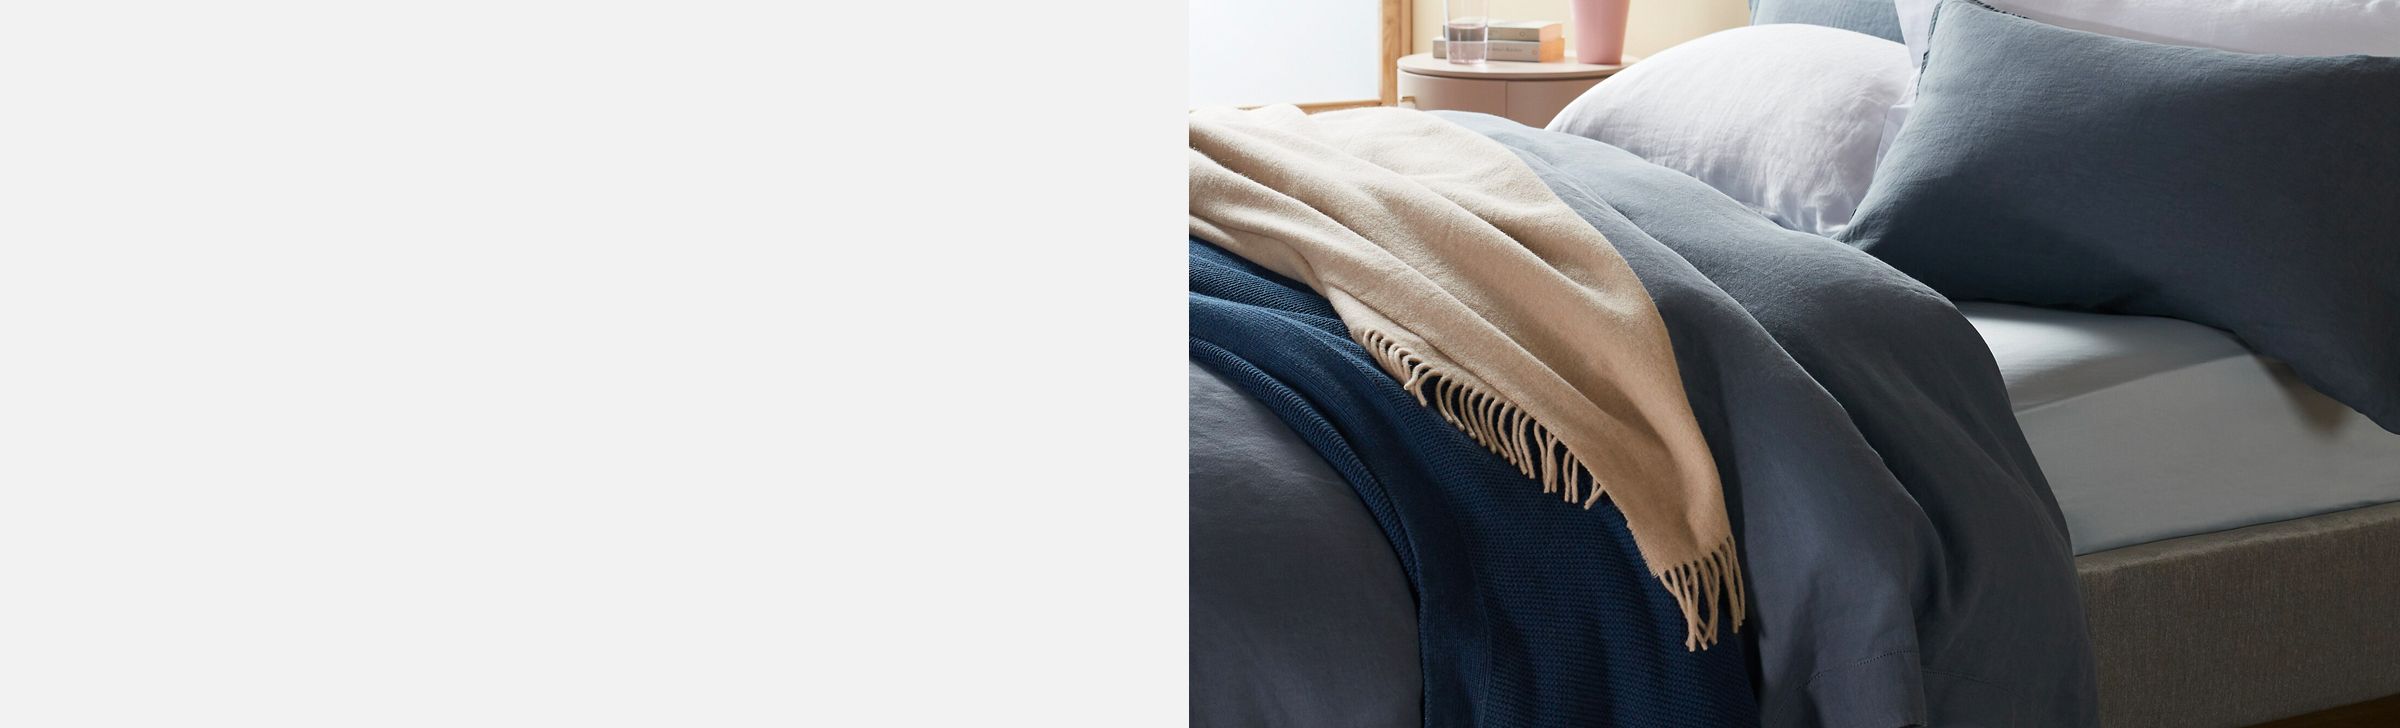 GREY THROWS, BLANKETS & BEDSPREADS